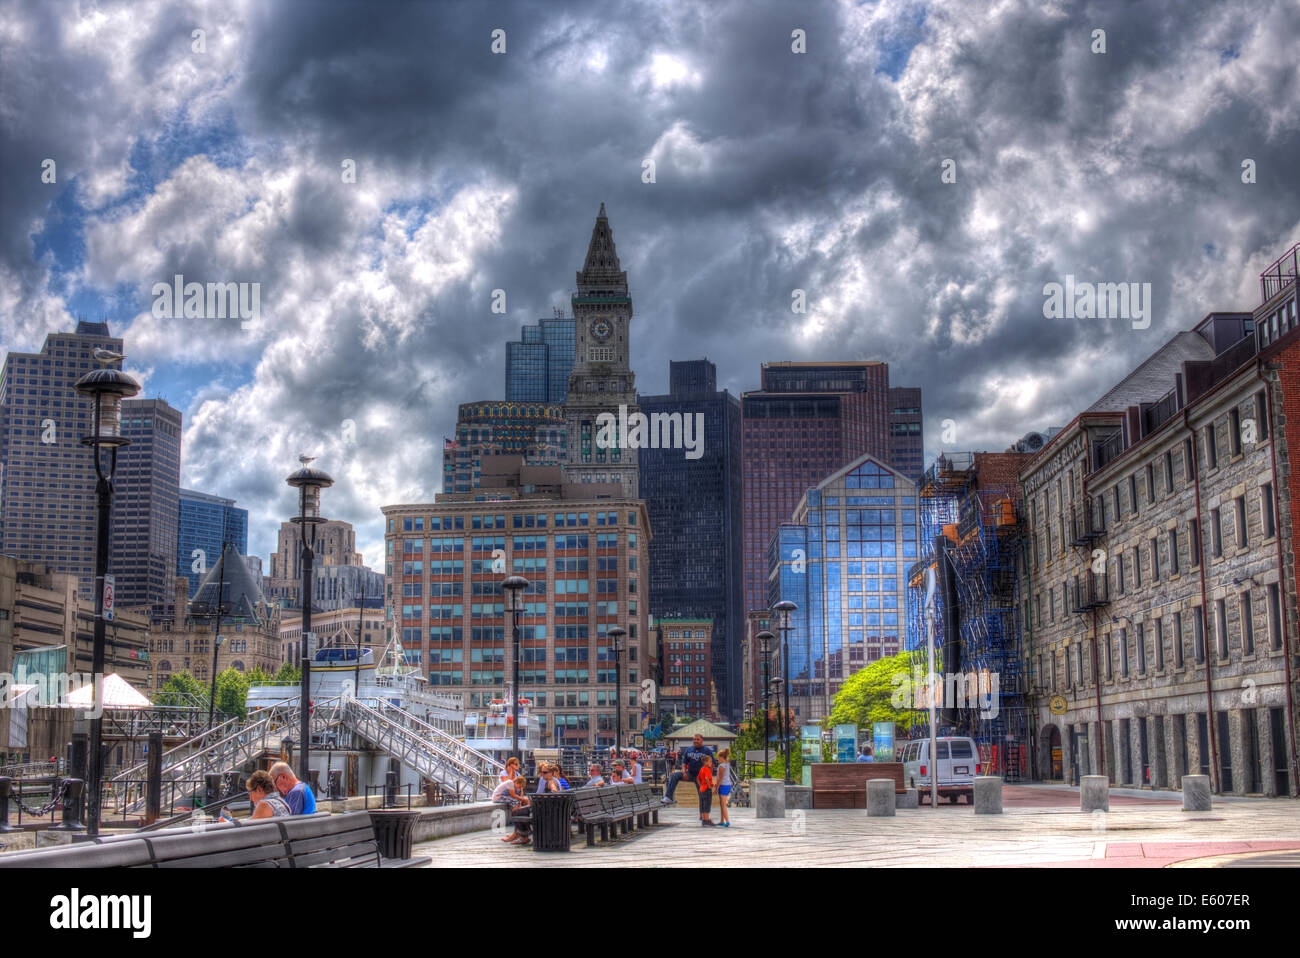 This is a picture of the city scape of Boston from the Aquarium waterfront. It is HDR photography. Stock Photo